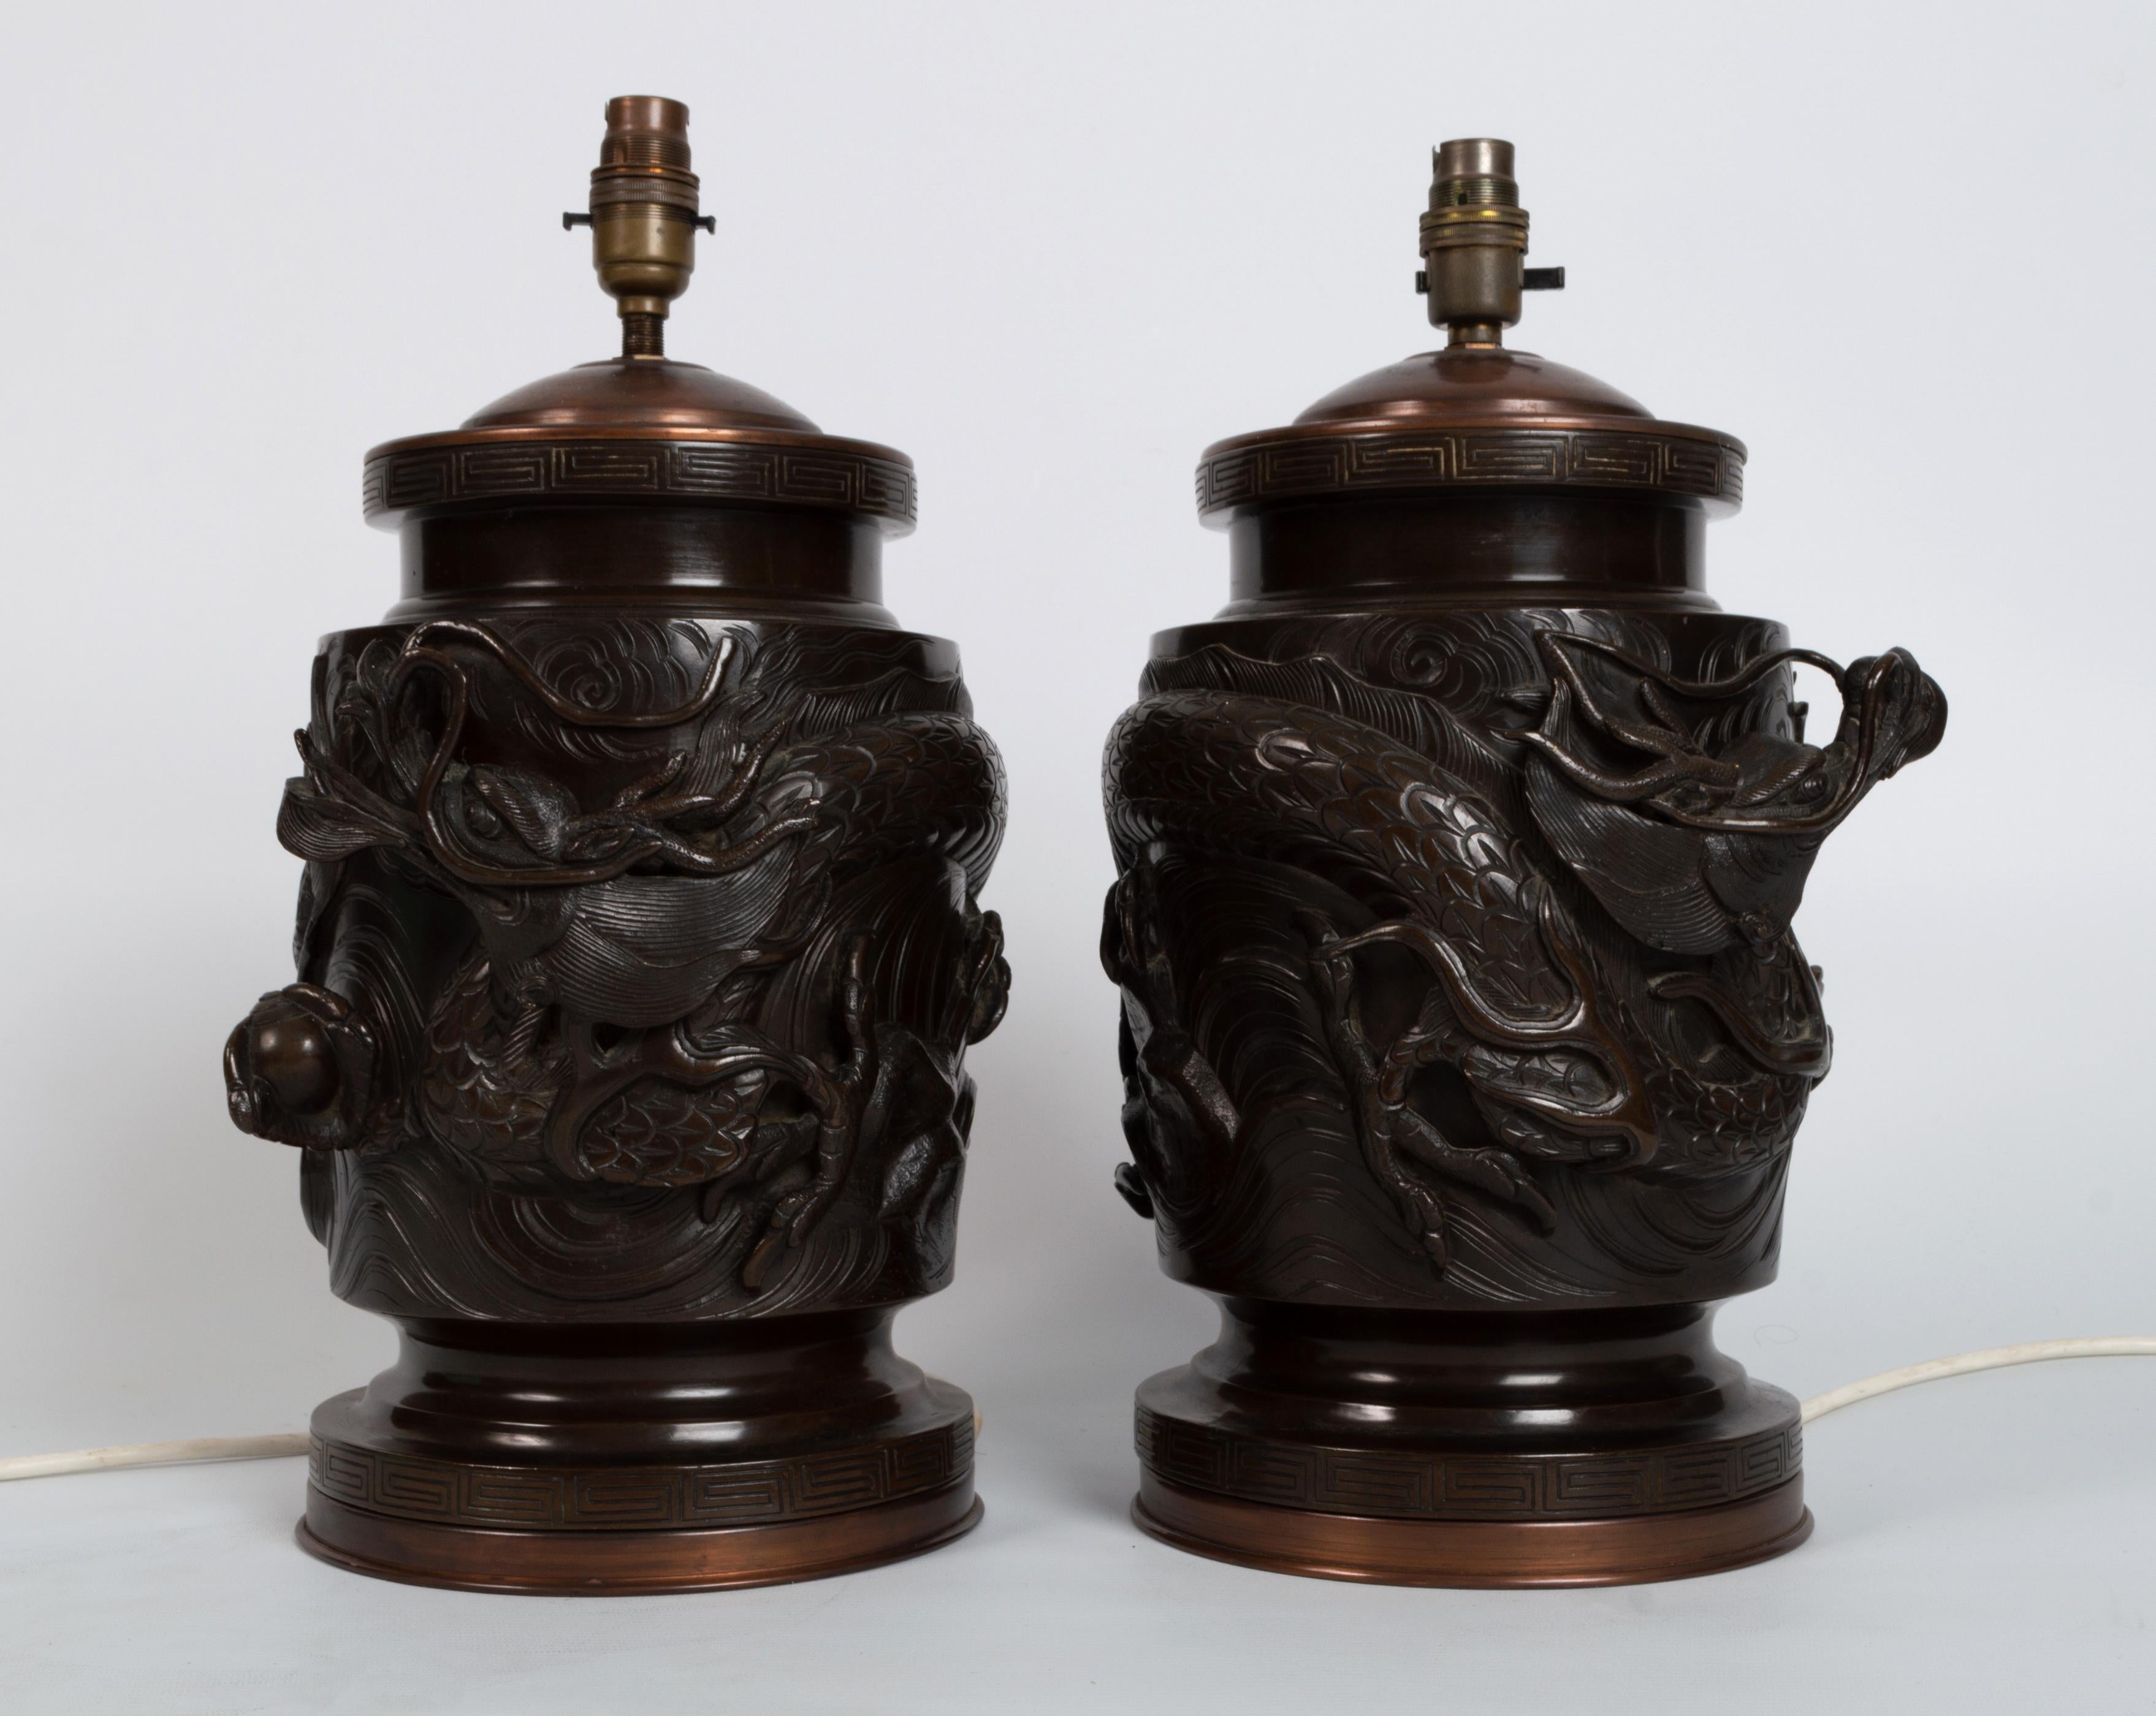 A pair of antique 19th century Meiji Period Japanese patinated bronze vase table lamps.

A pair of Japanese patinated bronze vases of cylindrical form, cast with mythological creatures amongst prunus, Greek key pattern to rim and foot. Fitted for